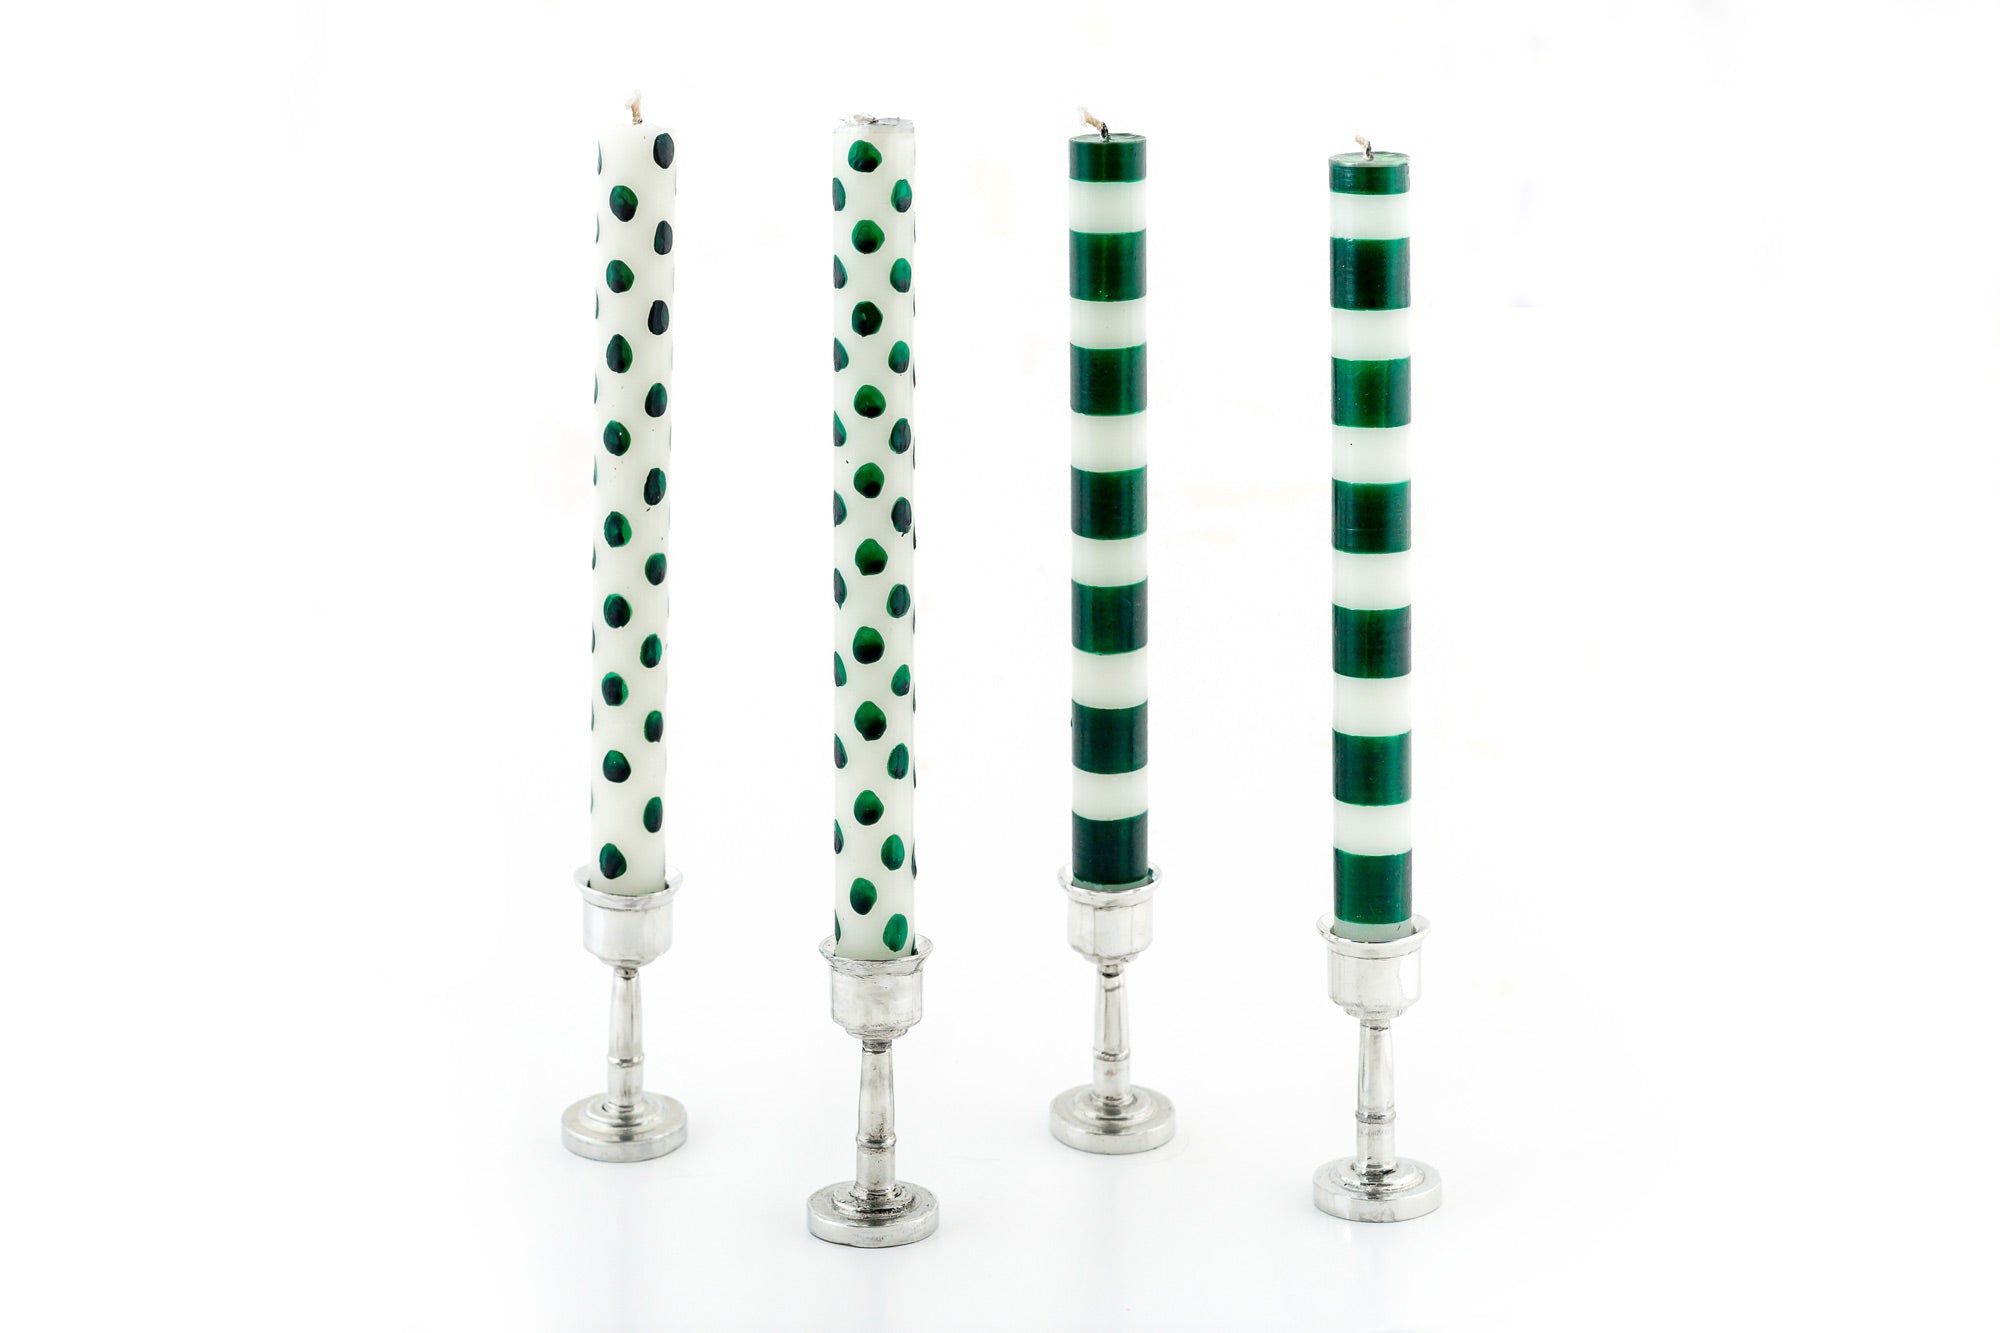 Two tapers with a white background & dark green dots alongside two tapers with white background and dark green stripes.  All four tapers are in pewter taper holders.